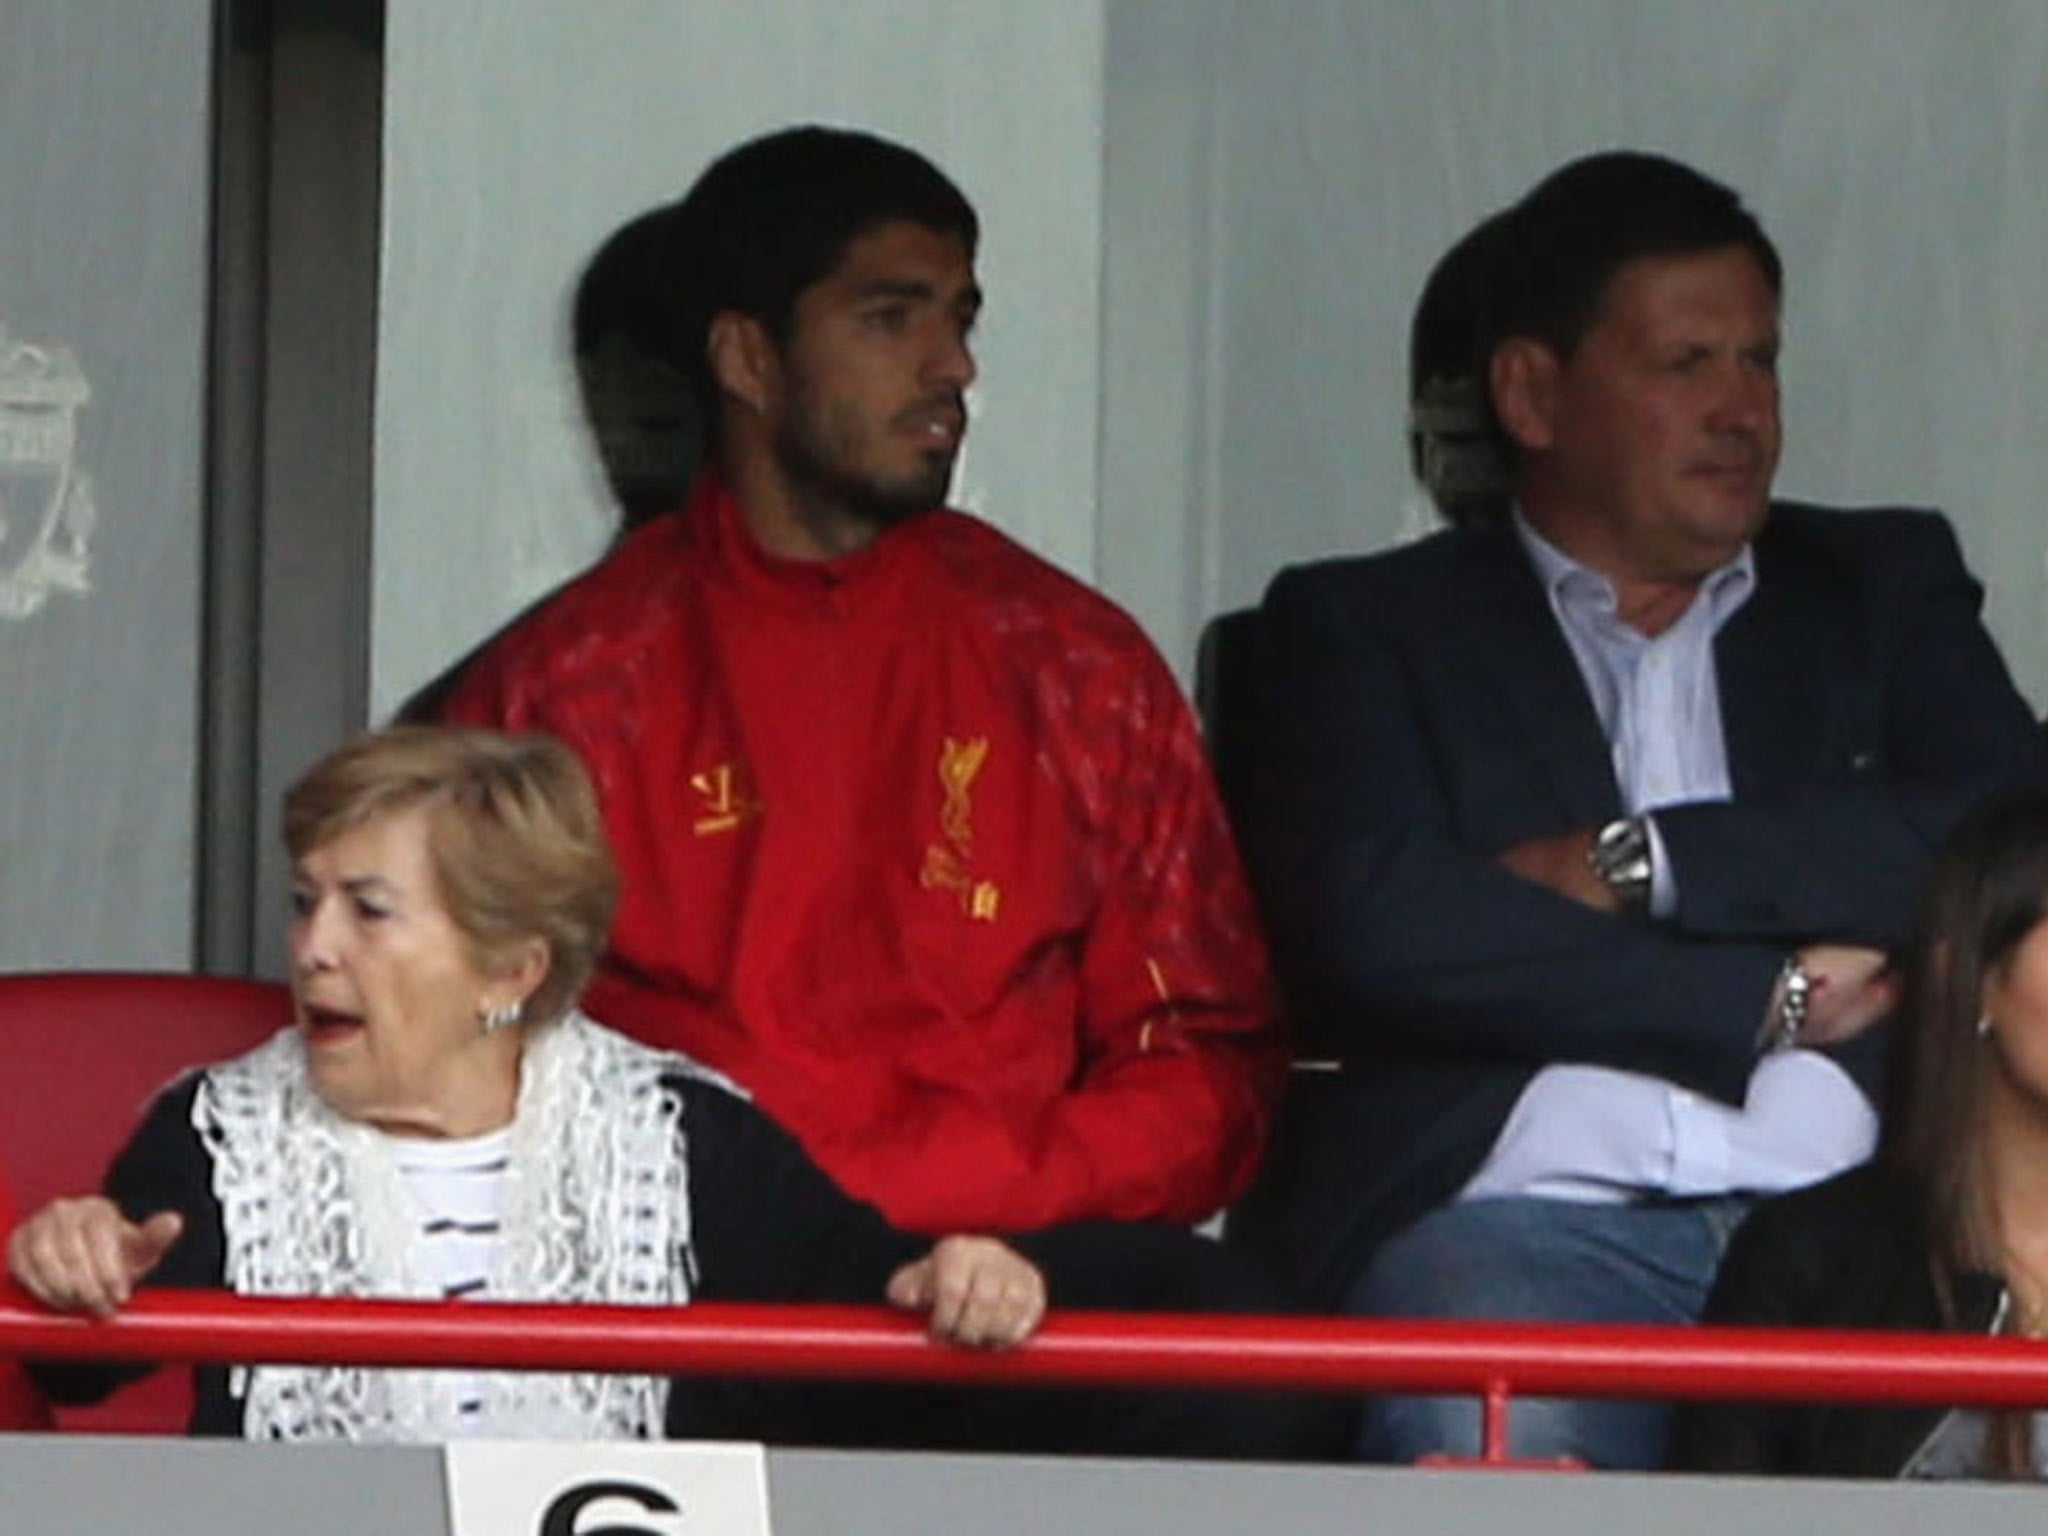 Luis Suarez pictured at Anfield during Liverpool's victory over Manchester United